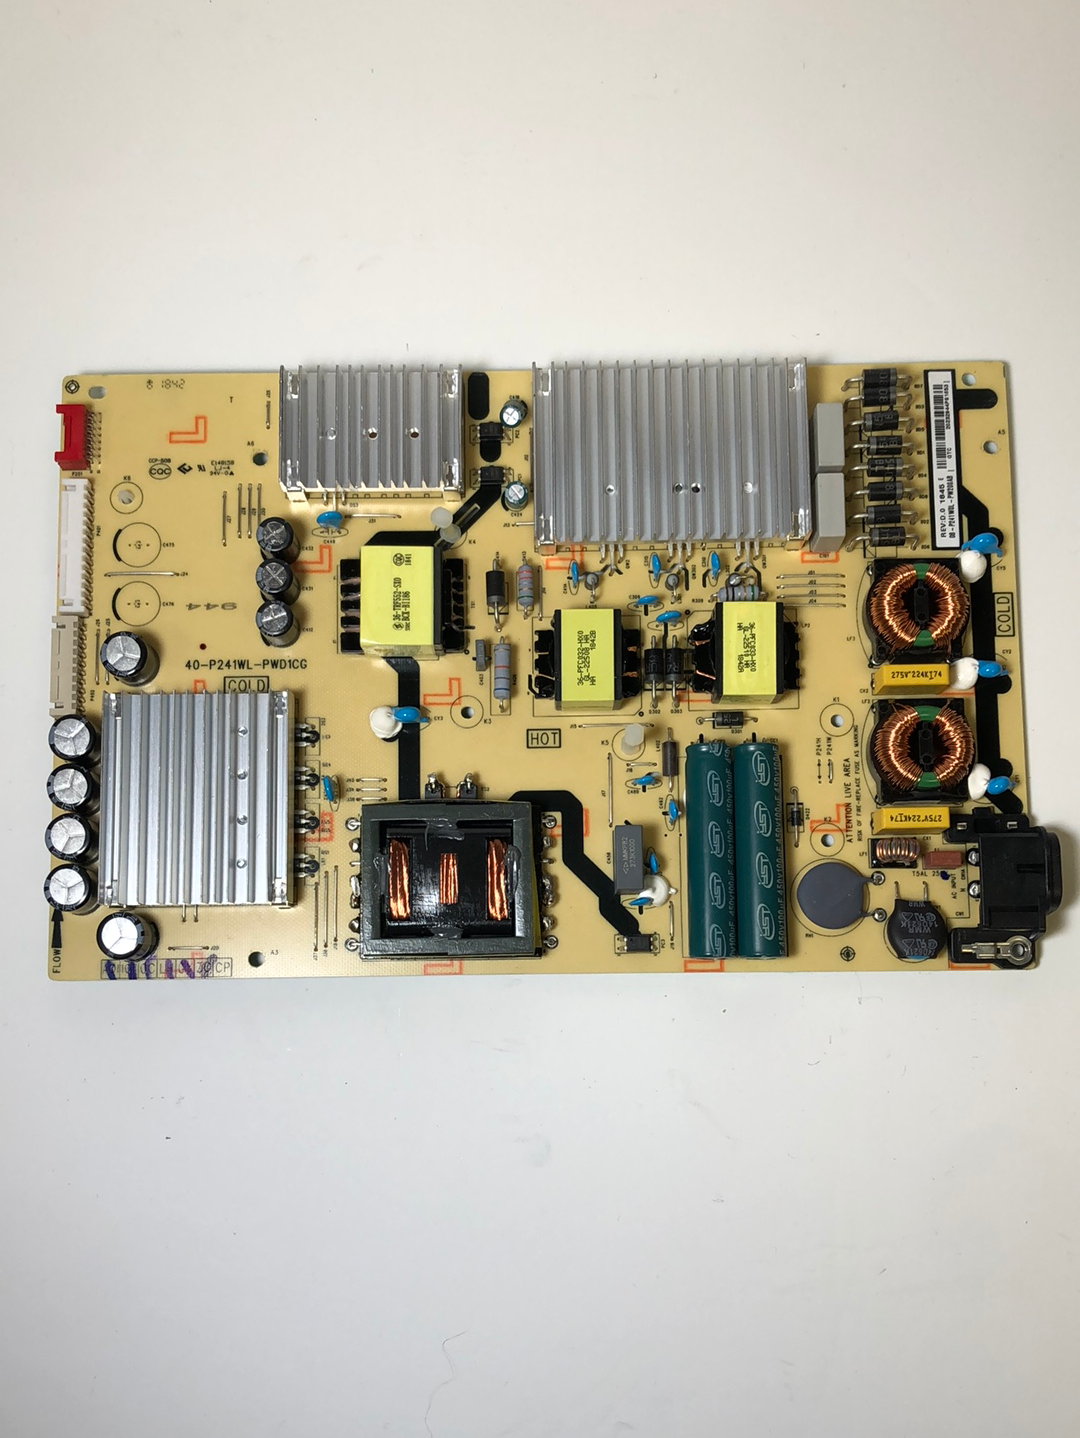 TCL 08-P241W0L-PW200AB Power Supply Board/LED Driver